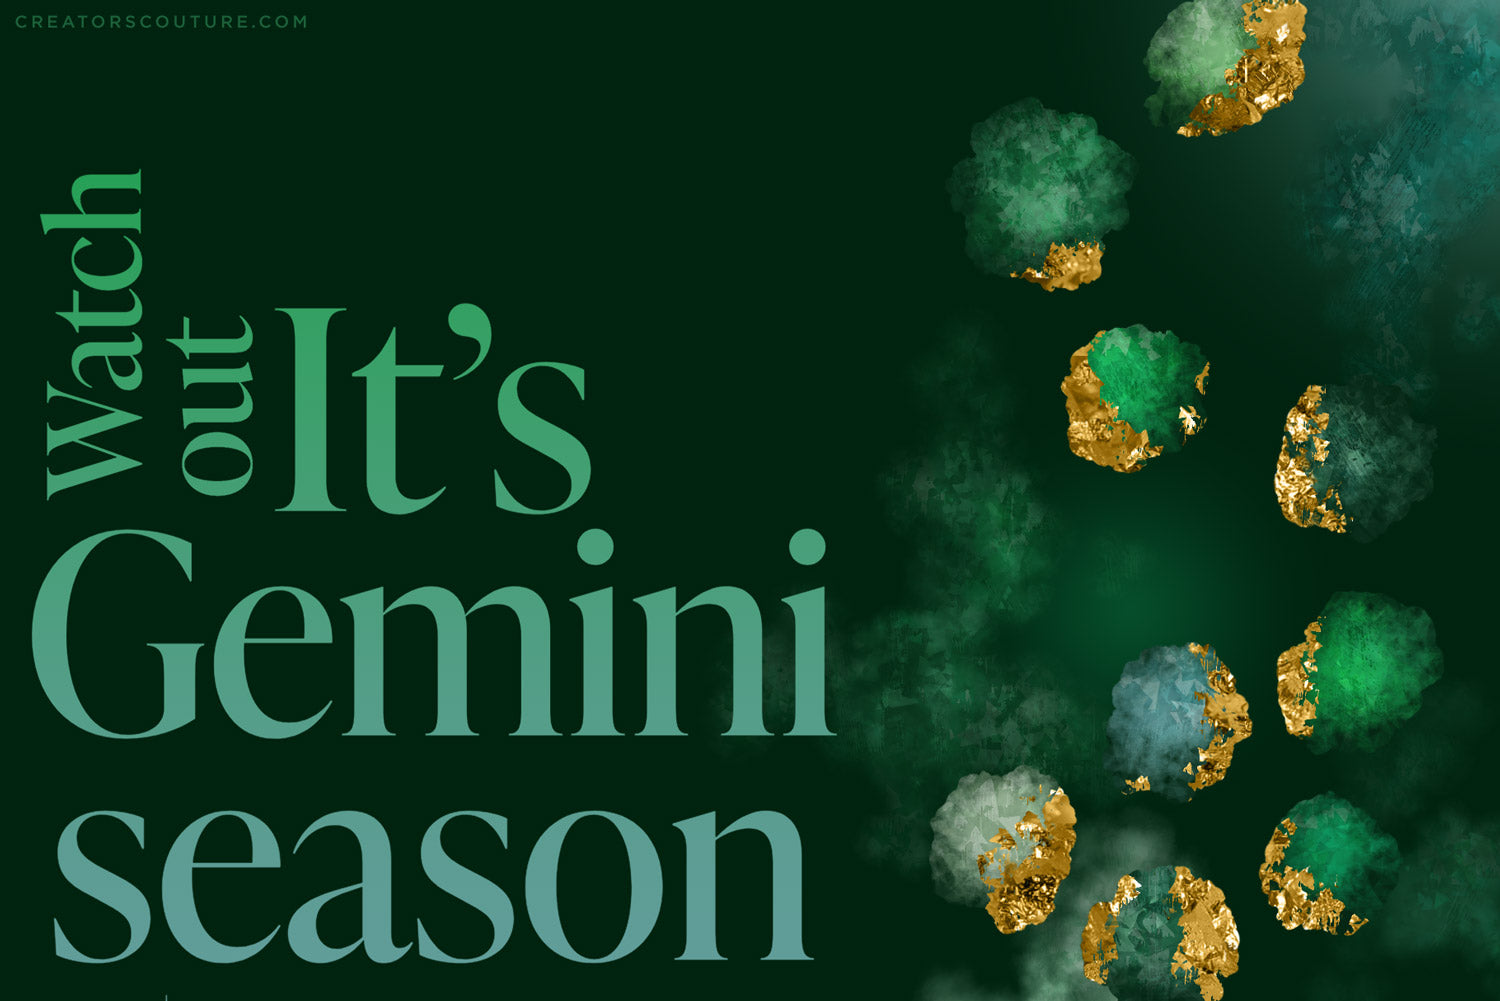 raw unpolished emerald textures for design and illustration - zodiac sample